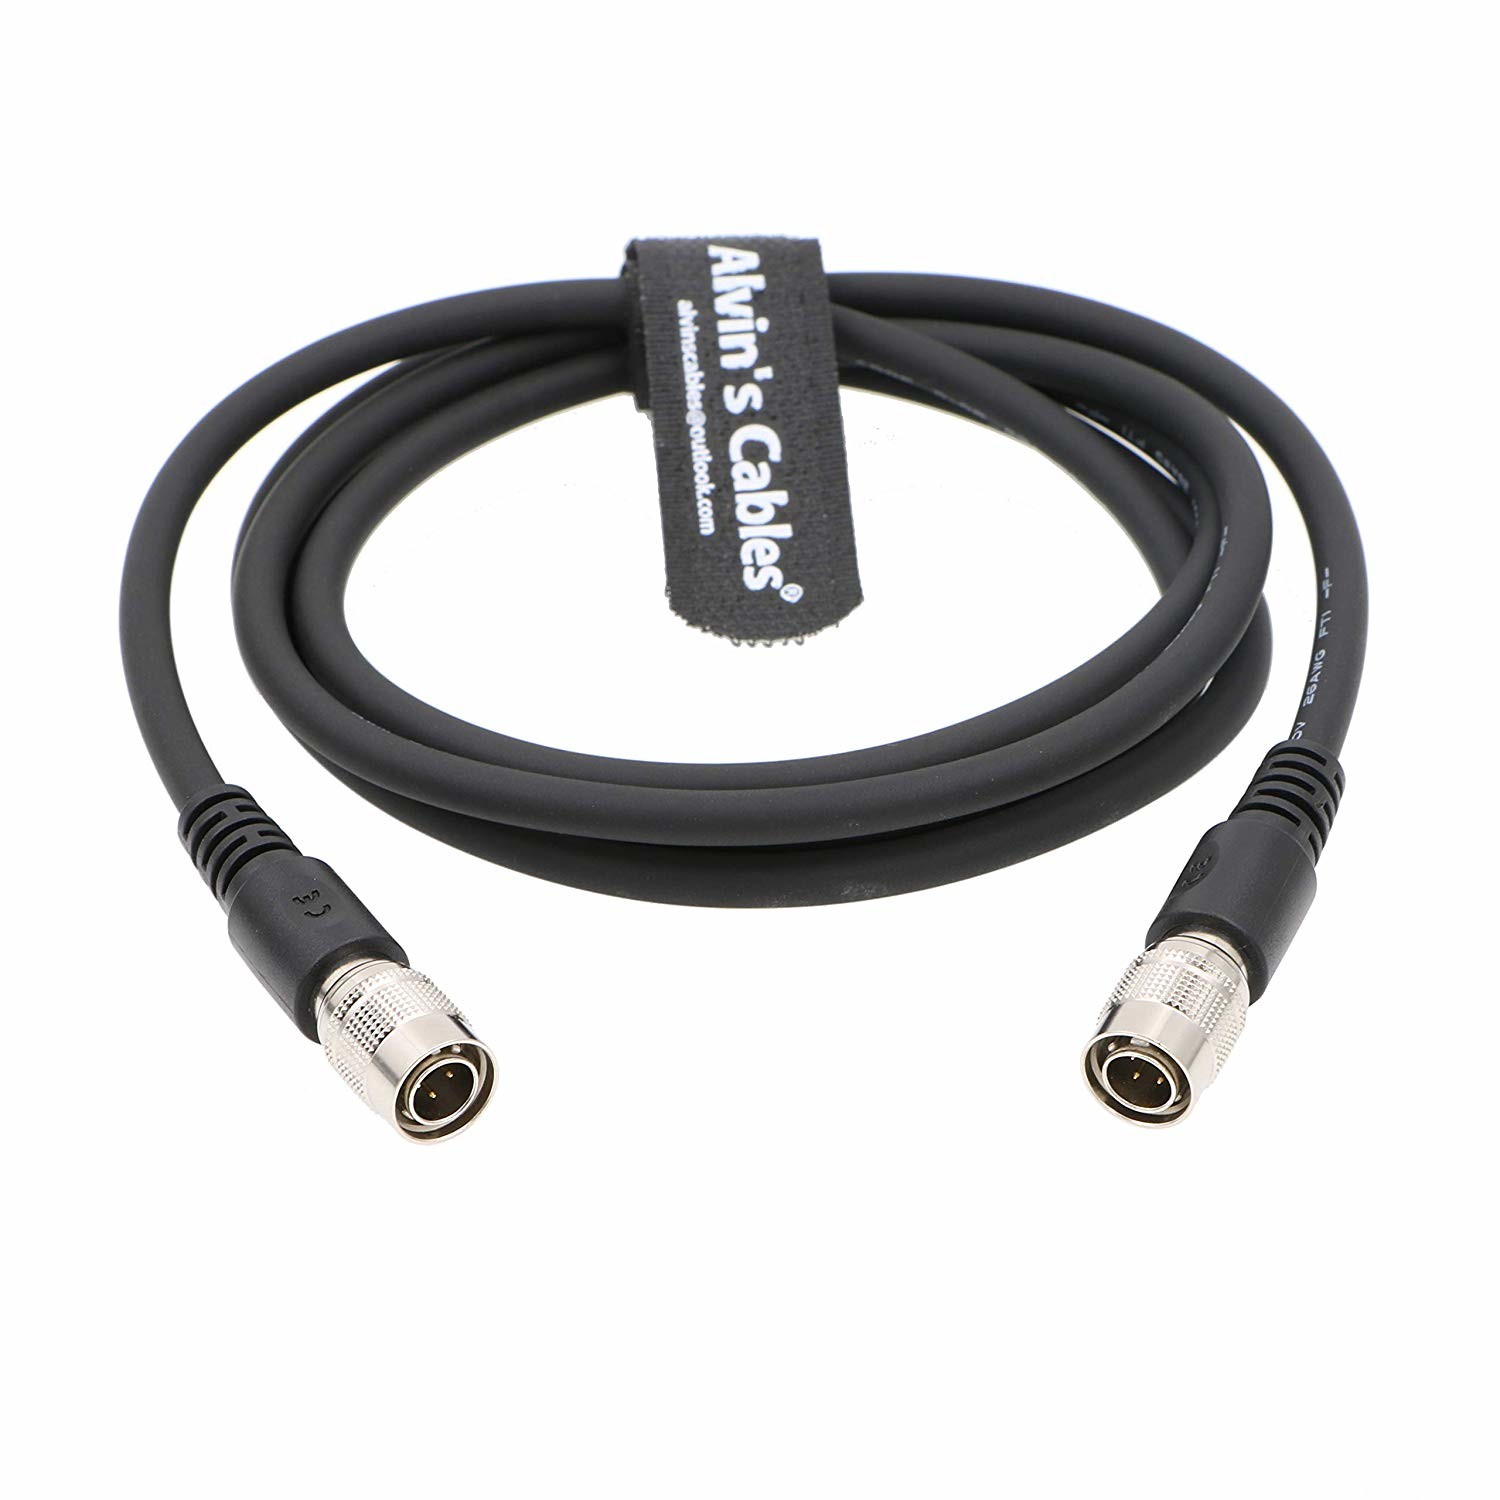 Quality 4 Pin Hirose Male To Male Cable For Trimble 5600 3600 Total Stations To Devices for sale